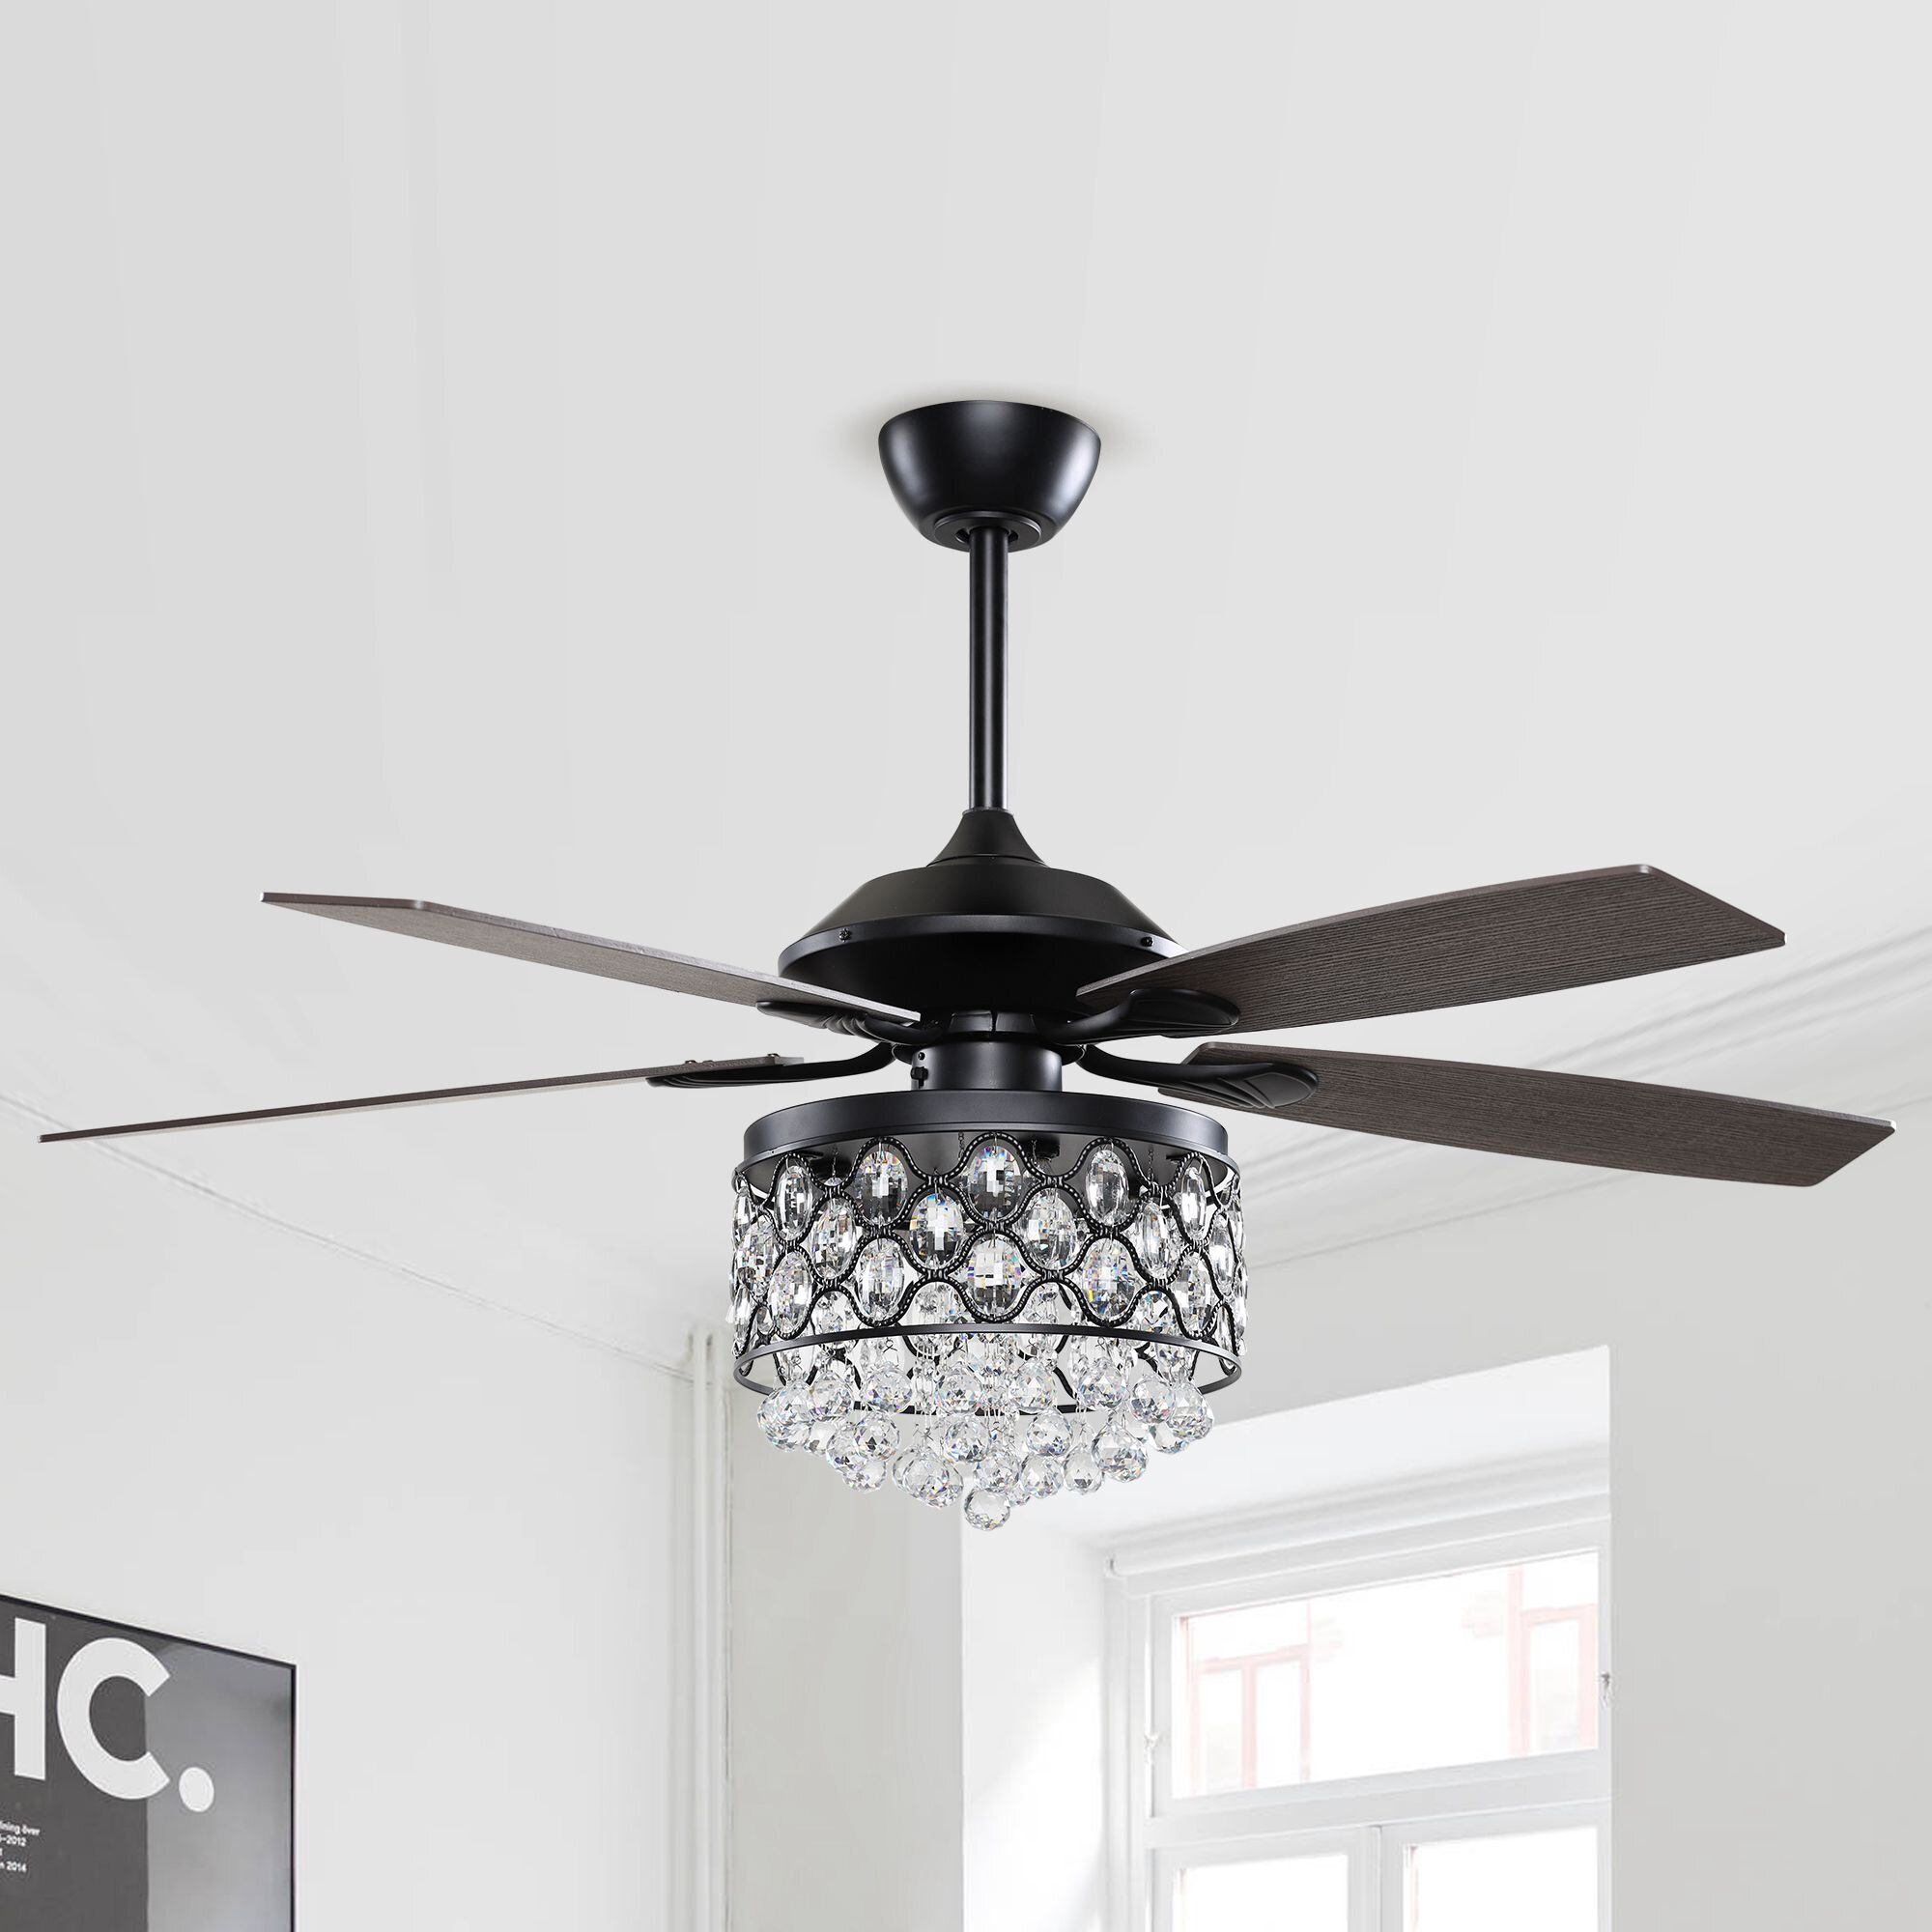 House Of Hampton 52 Frazee 5 Blade Crystal Ceiling Fan With Remote Control And Light Kit Included Reviews Wayfair